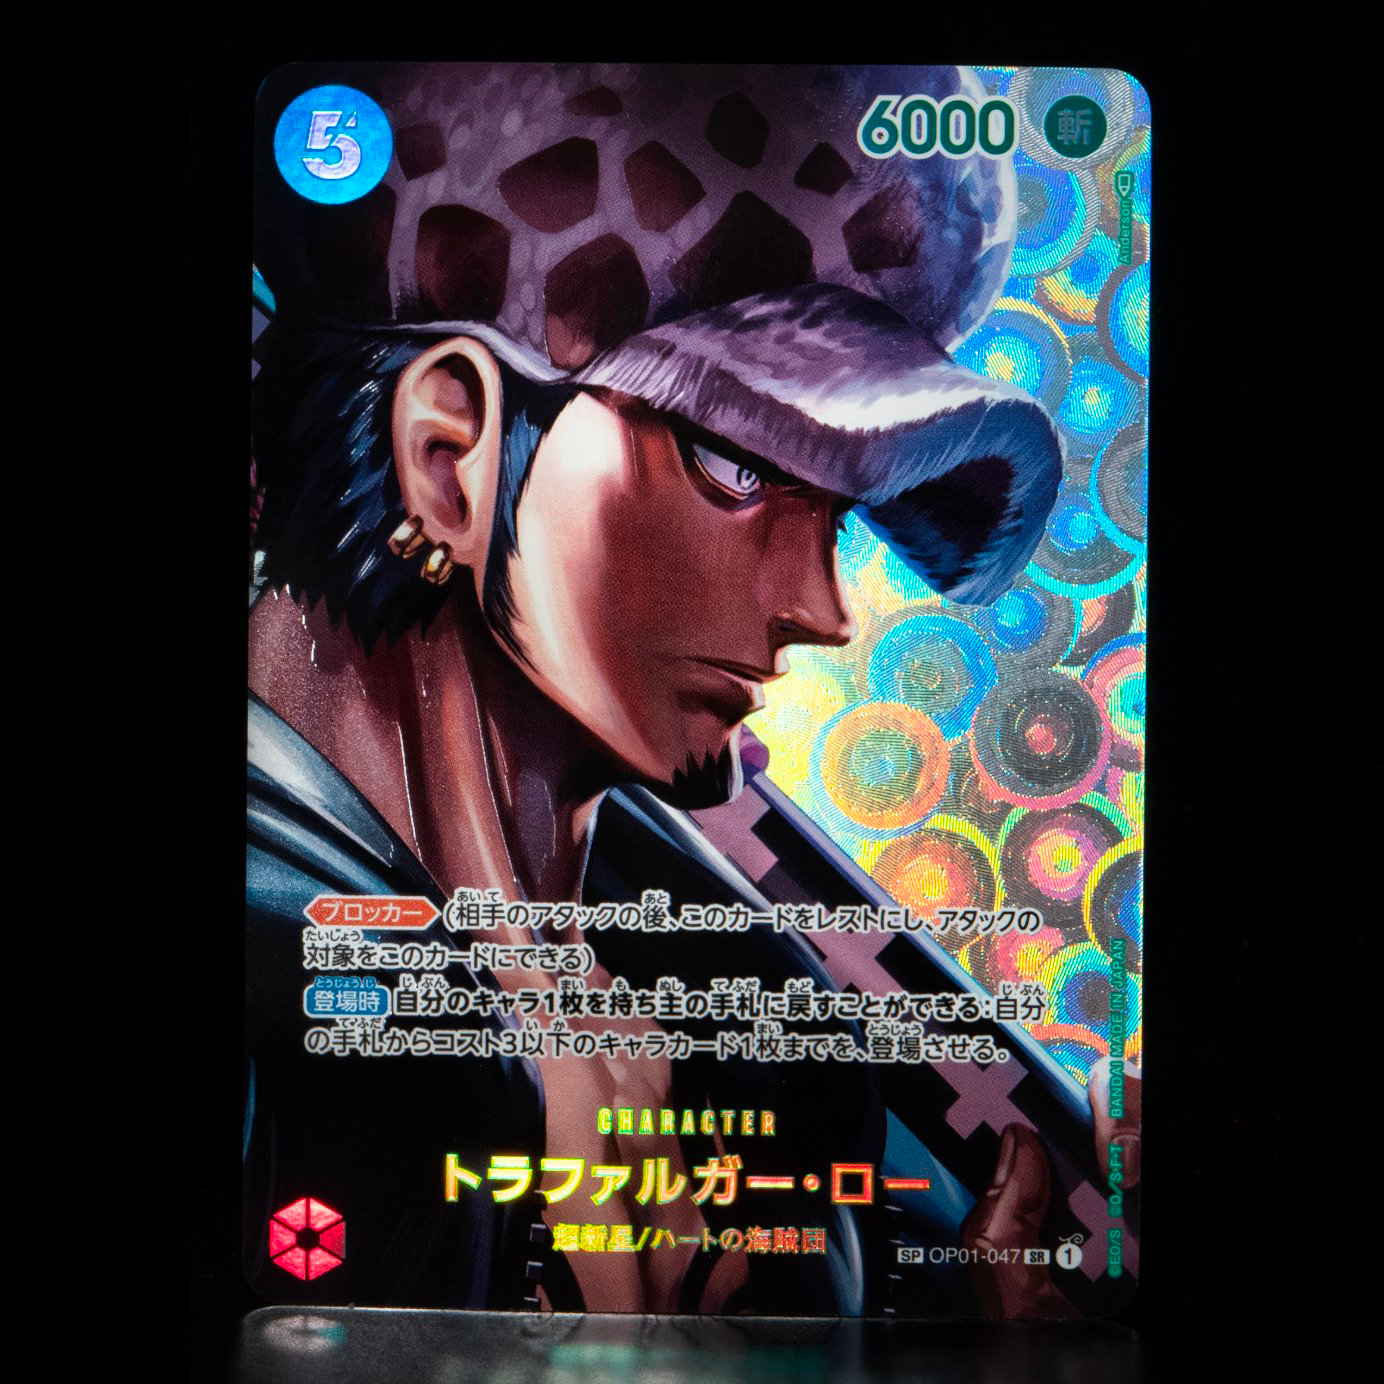 ONE PIECE CARD GAME ｢Kingdoms of Intrigue｣  ONE PIECE CARD GAME SPECIAL OP01-047 Super Rare card  Trafalgar Law